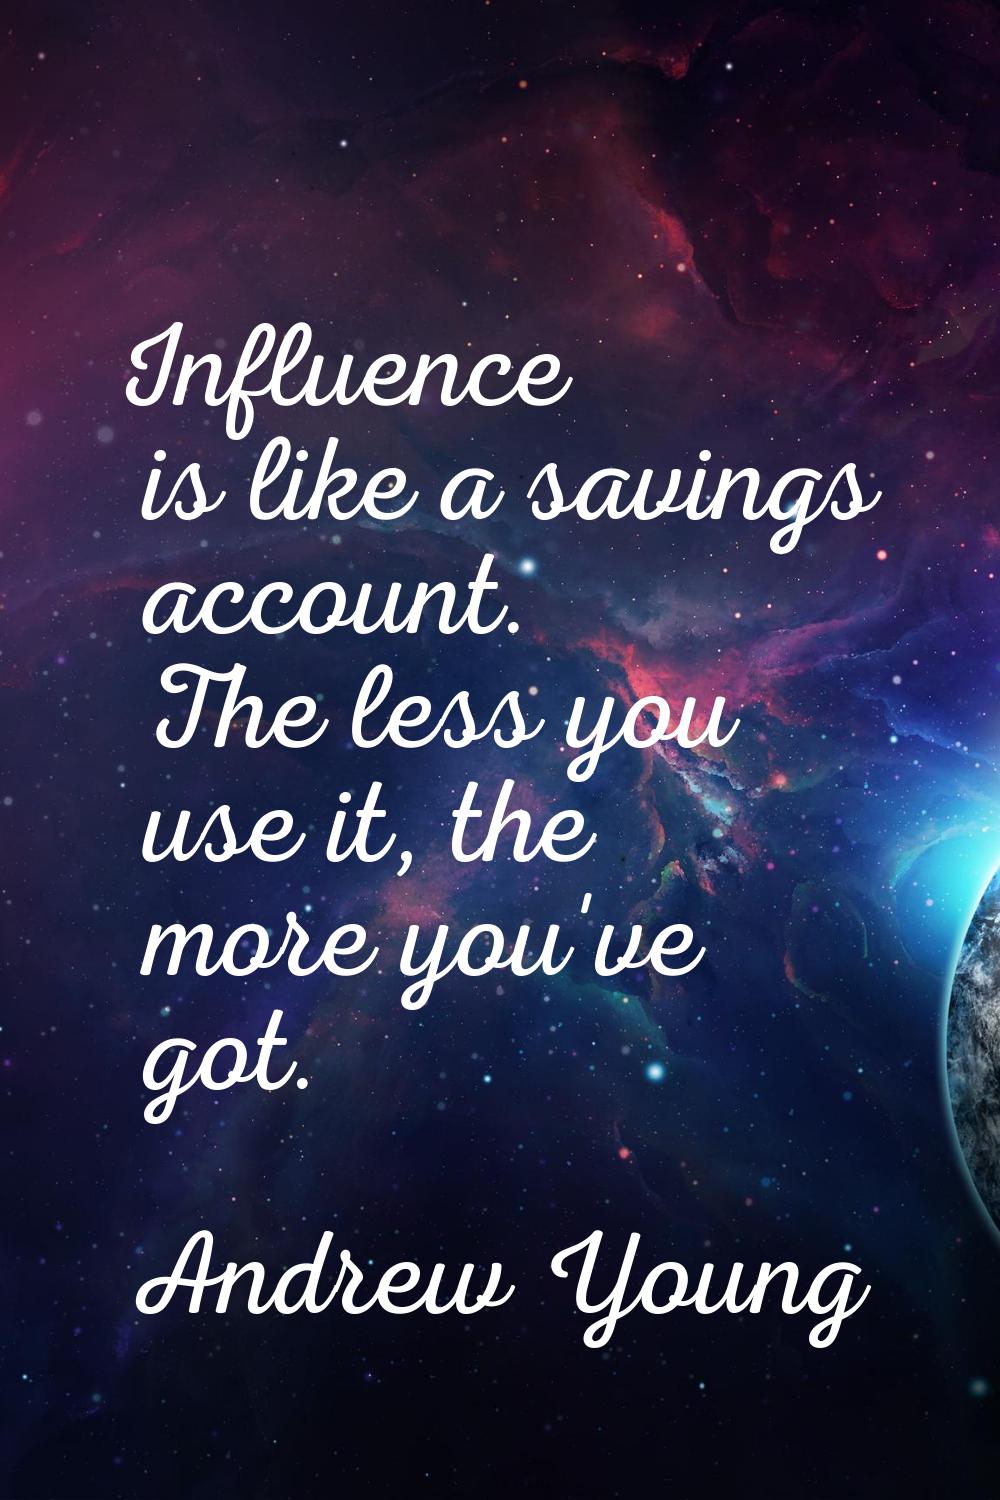 Influence is like a savings account. The less you use it, the more you've got.